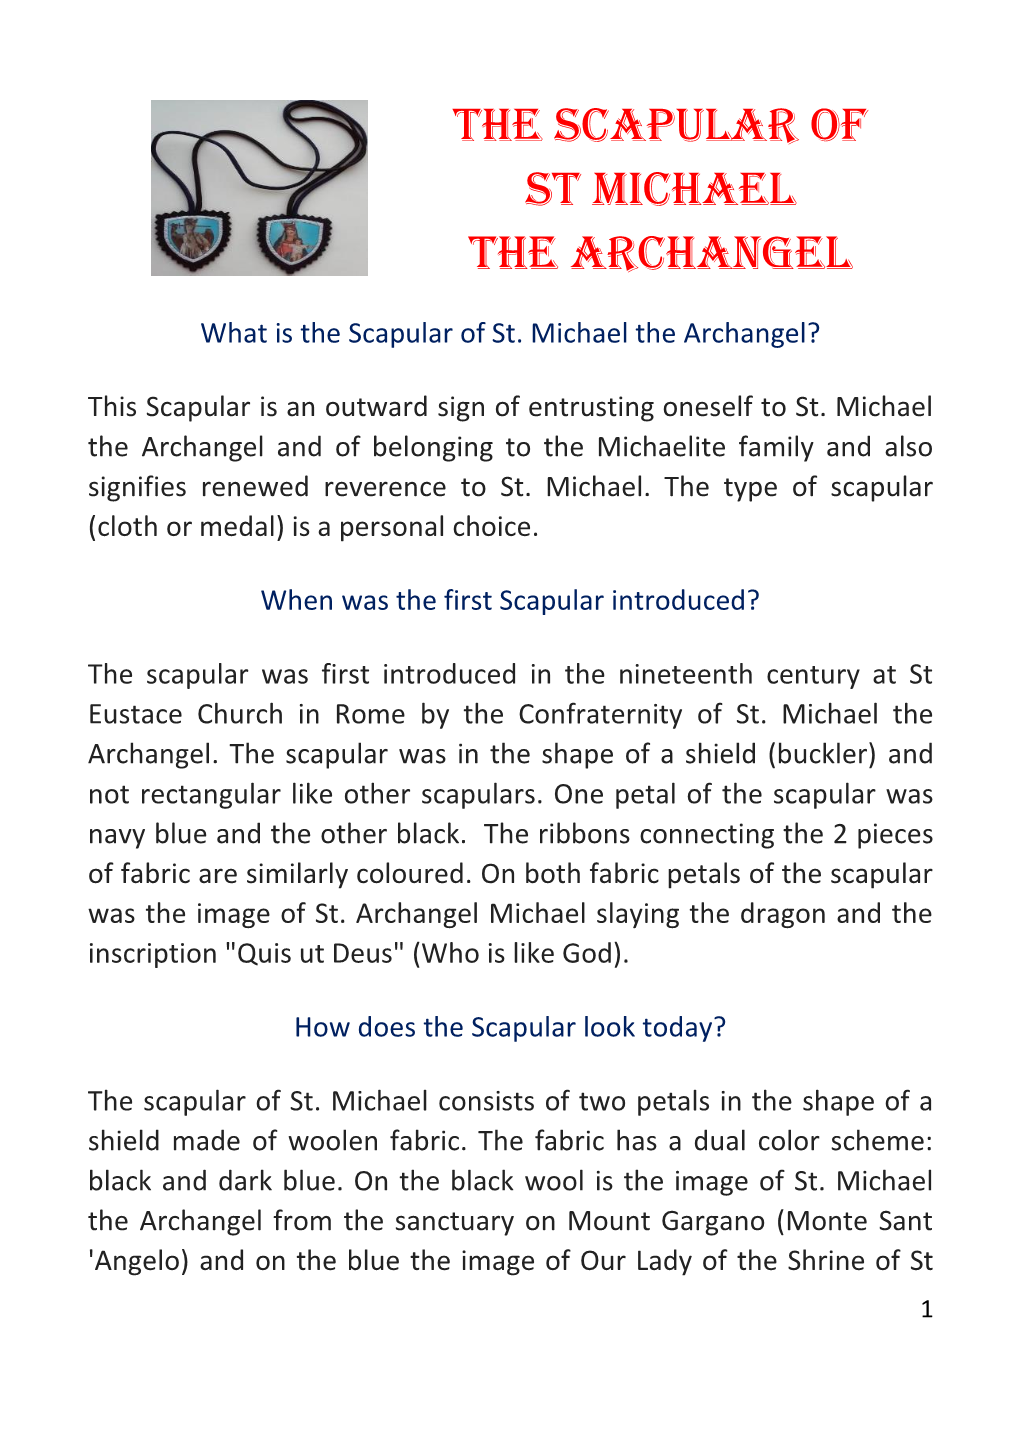 The Scapular of St Michael the Archangel